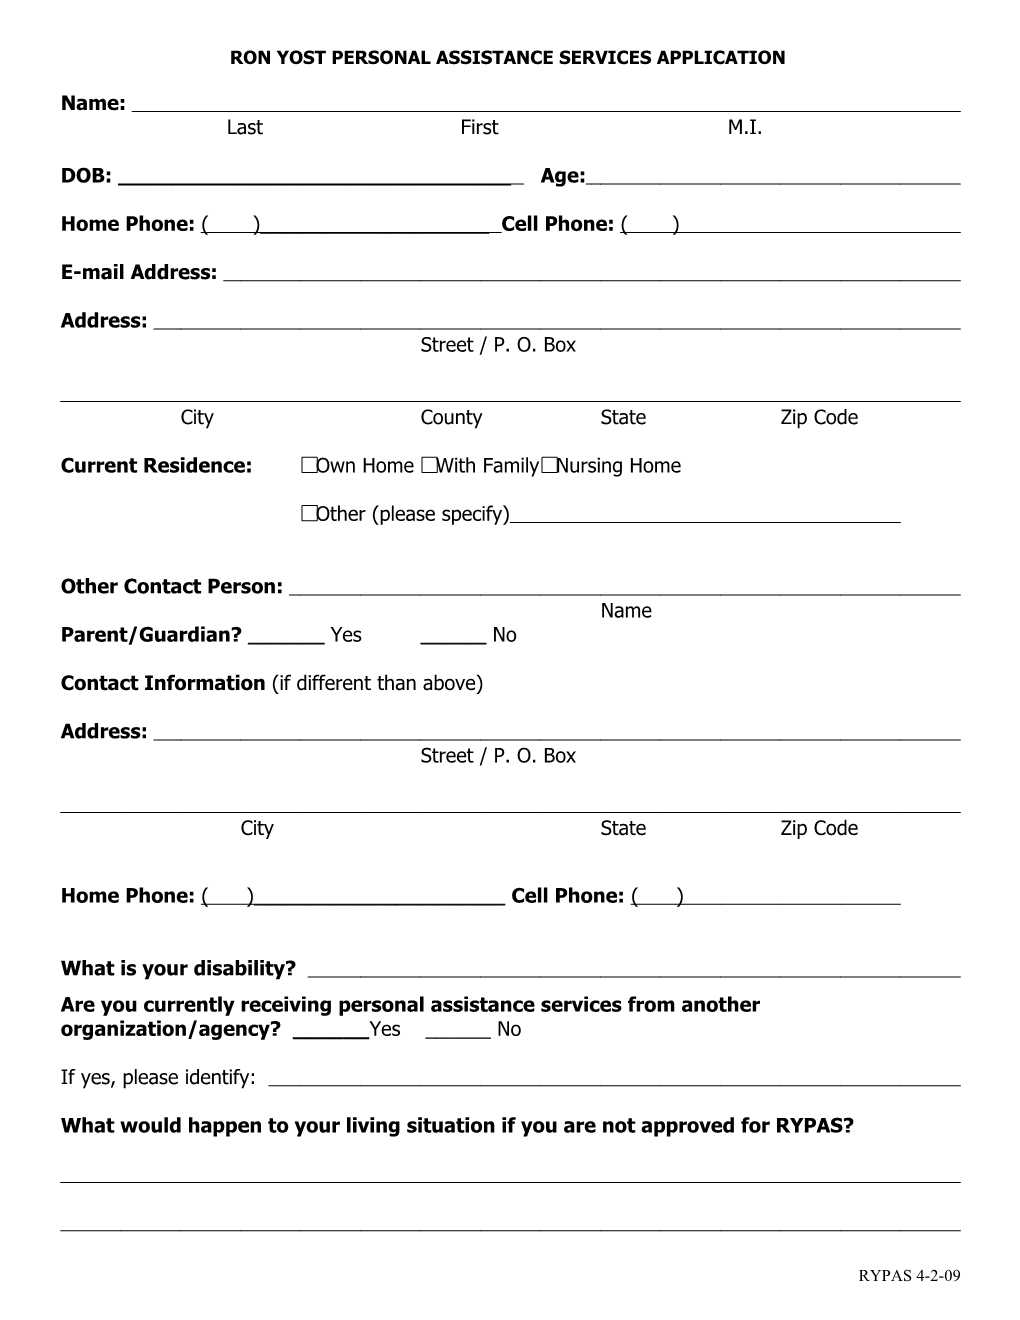 Ron Yost Personal Assistance Services Application